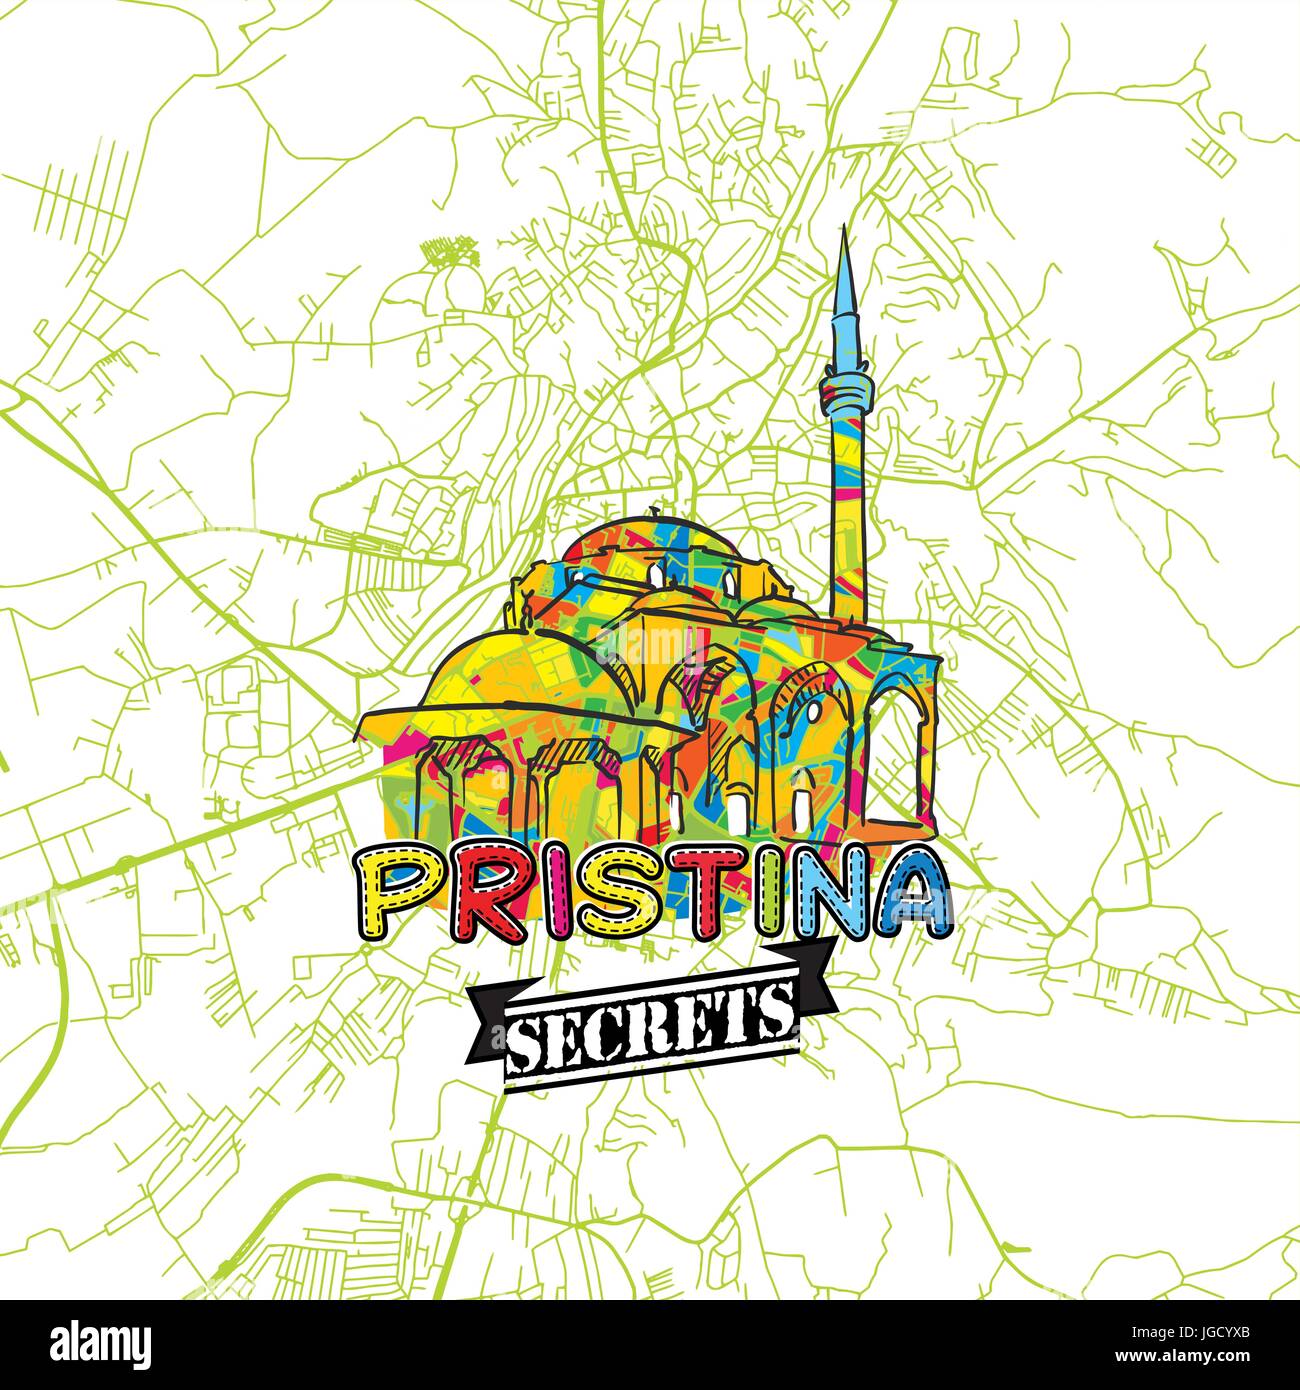 Pristina Travel Secrets Art Map for mapping experts and travel guides. Handmade city logo, typo badge and hand drawn vector image on top are grouped a Stock Vector